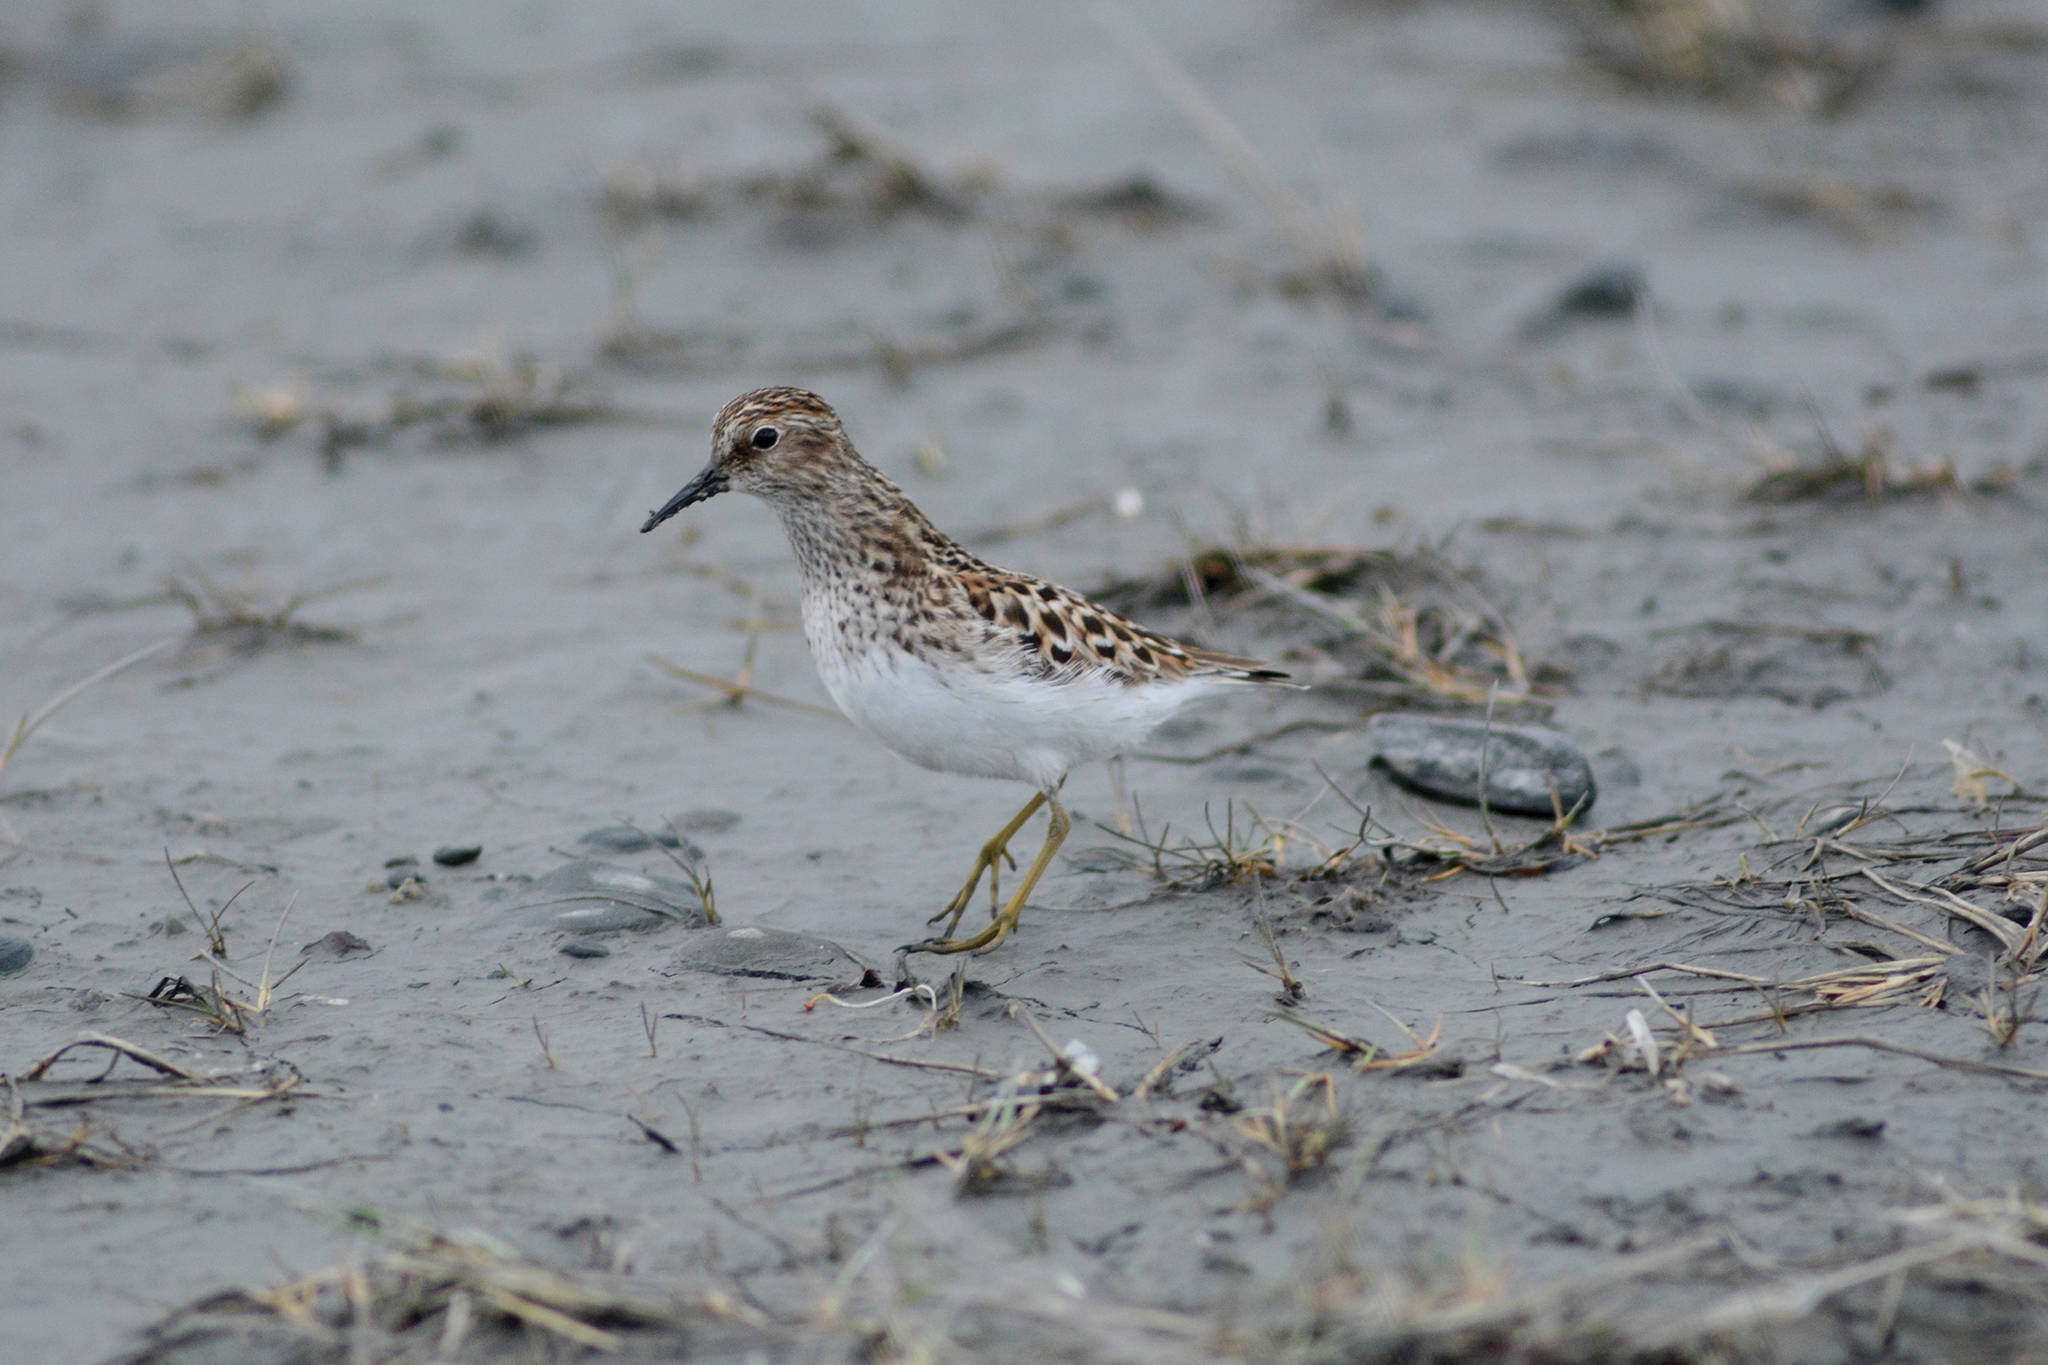 A pectoral sandpiper feeds in Louie’s Lagoon on Saturday, May 9, 2020, on the Homer Spit in Homer, Alaska. (Photo by Michael Armstrong/Homer News)